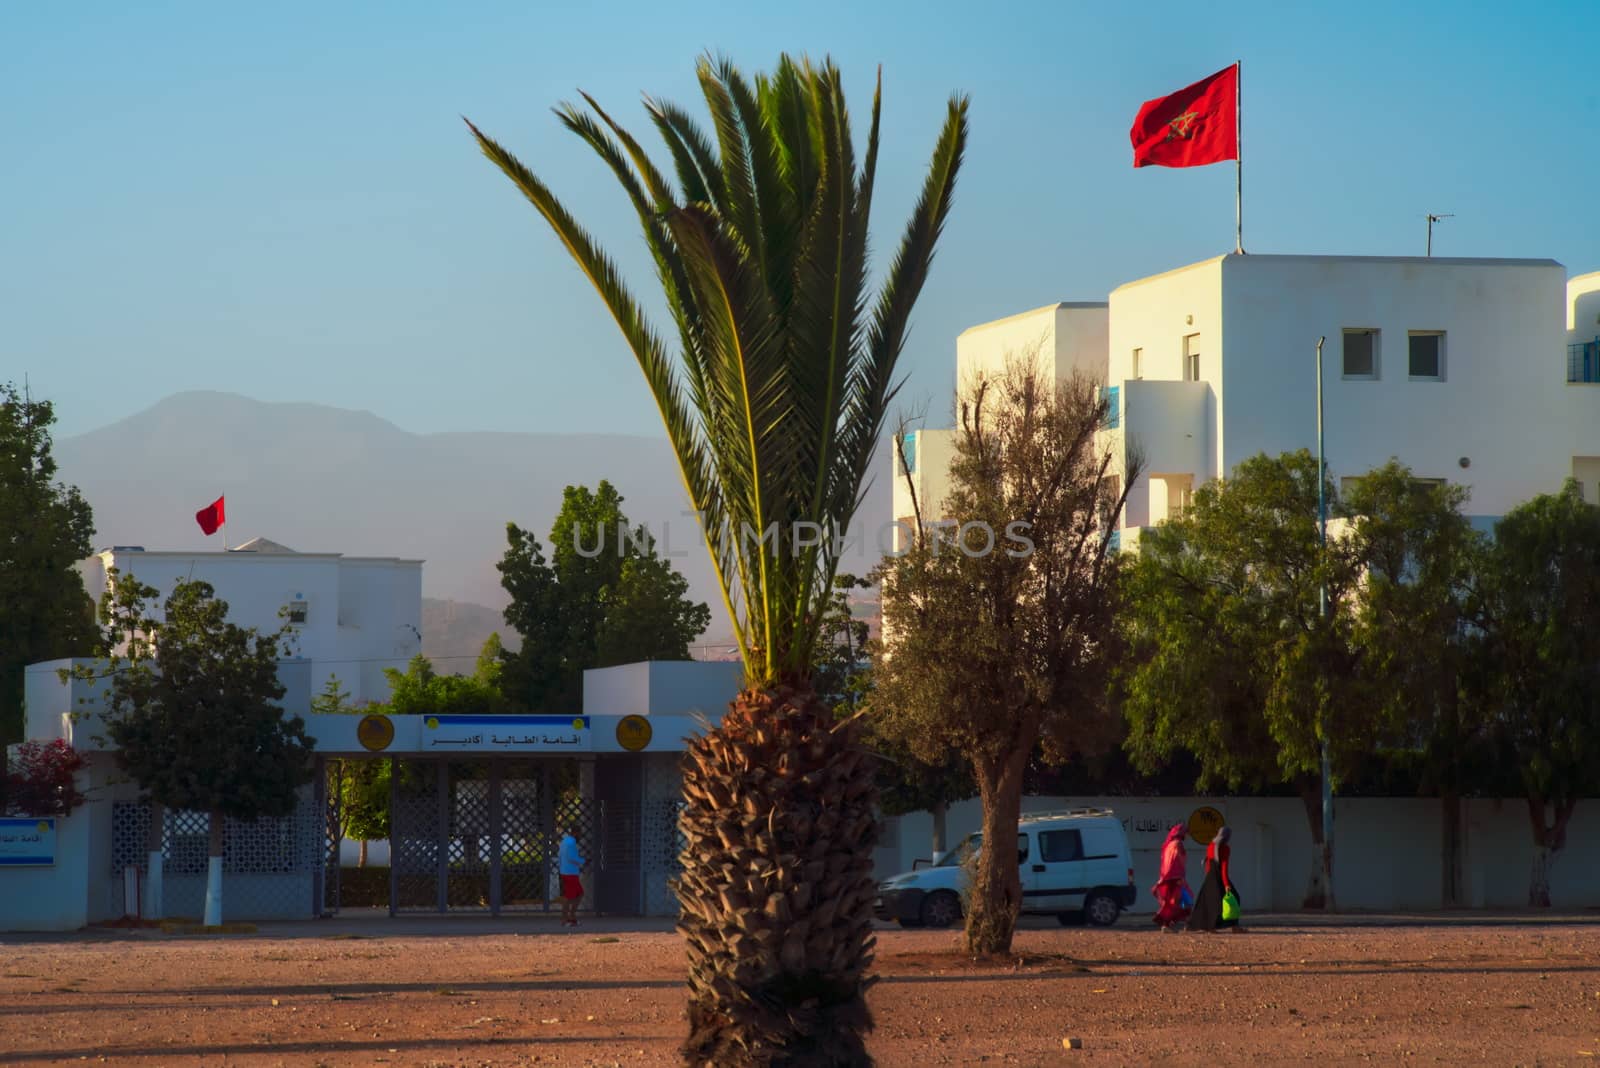 Agadir university Ibn Zohr entrance with Moroccan flag mountains and trees